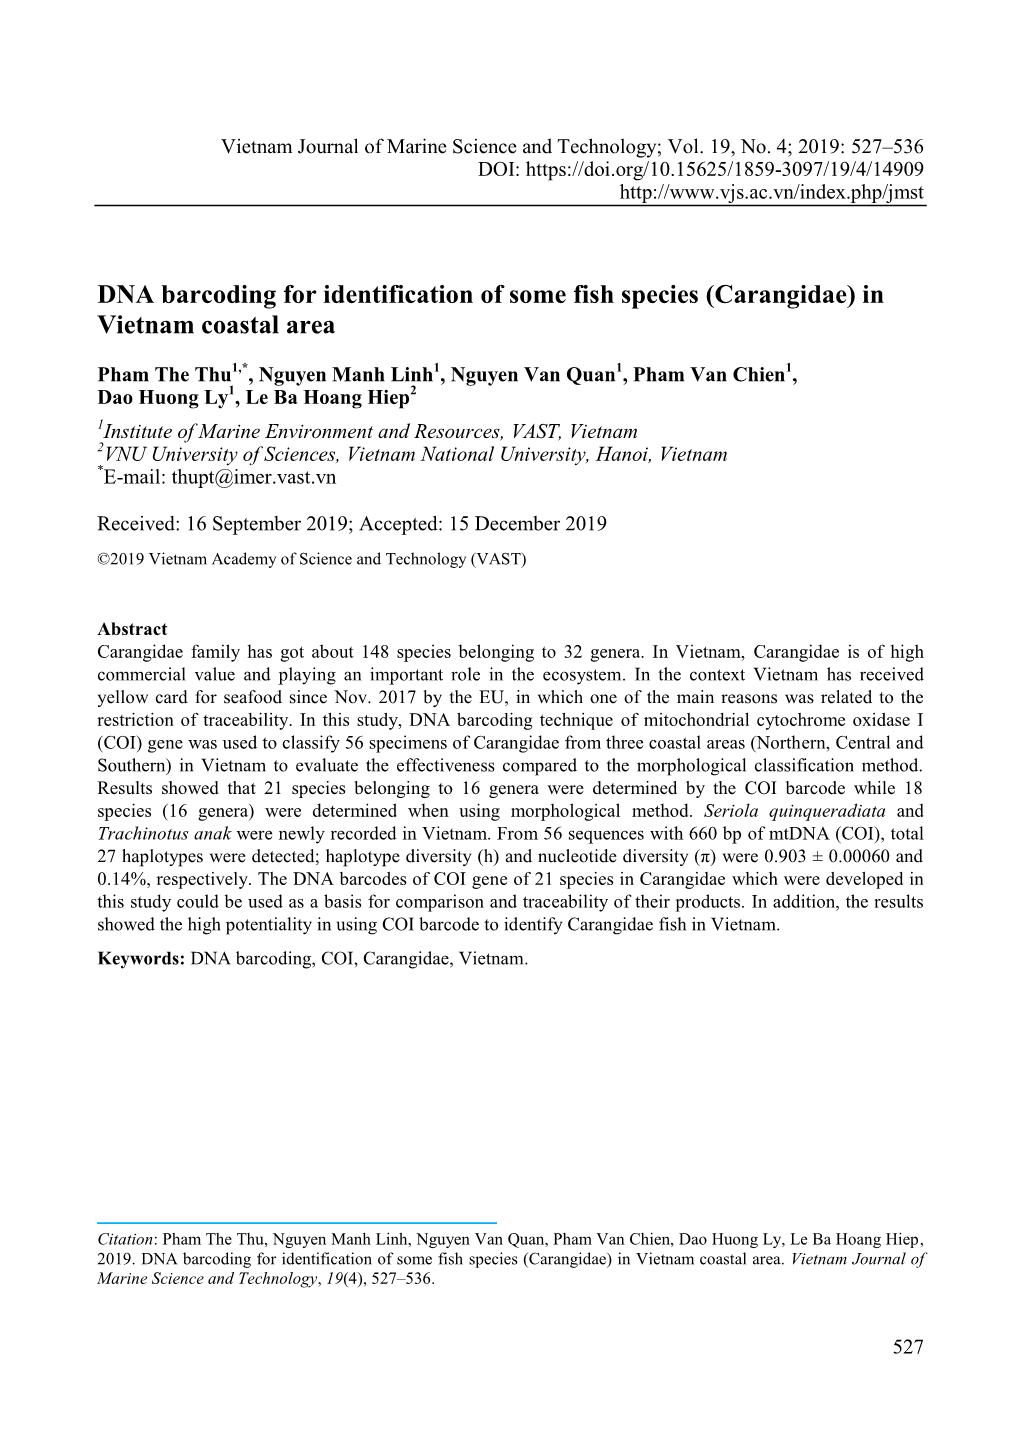 DNA Barcoding for Identification of Some Fish Species (Carangidae) in Vietnam Coastal Area